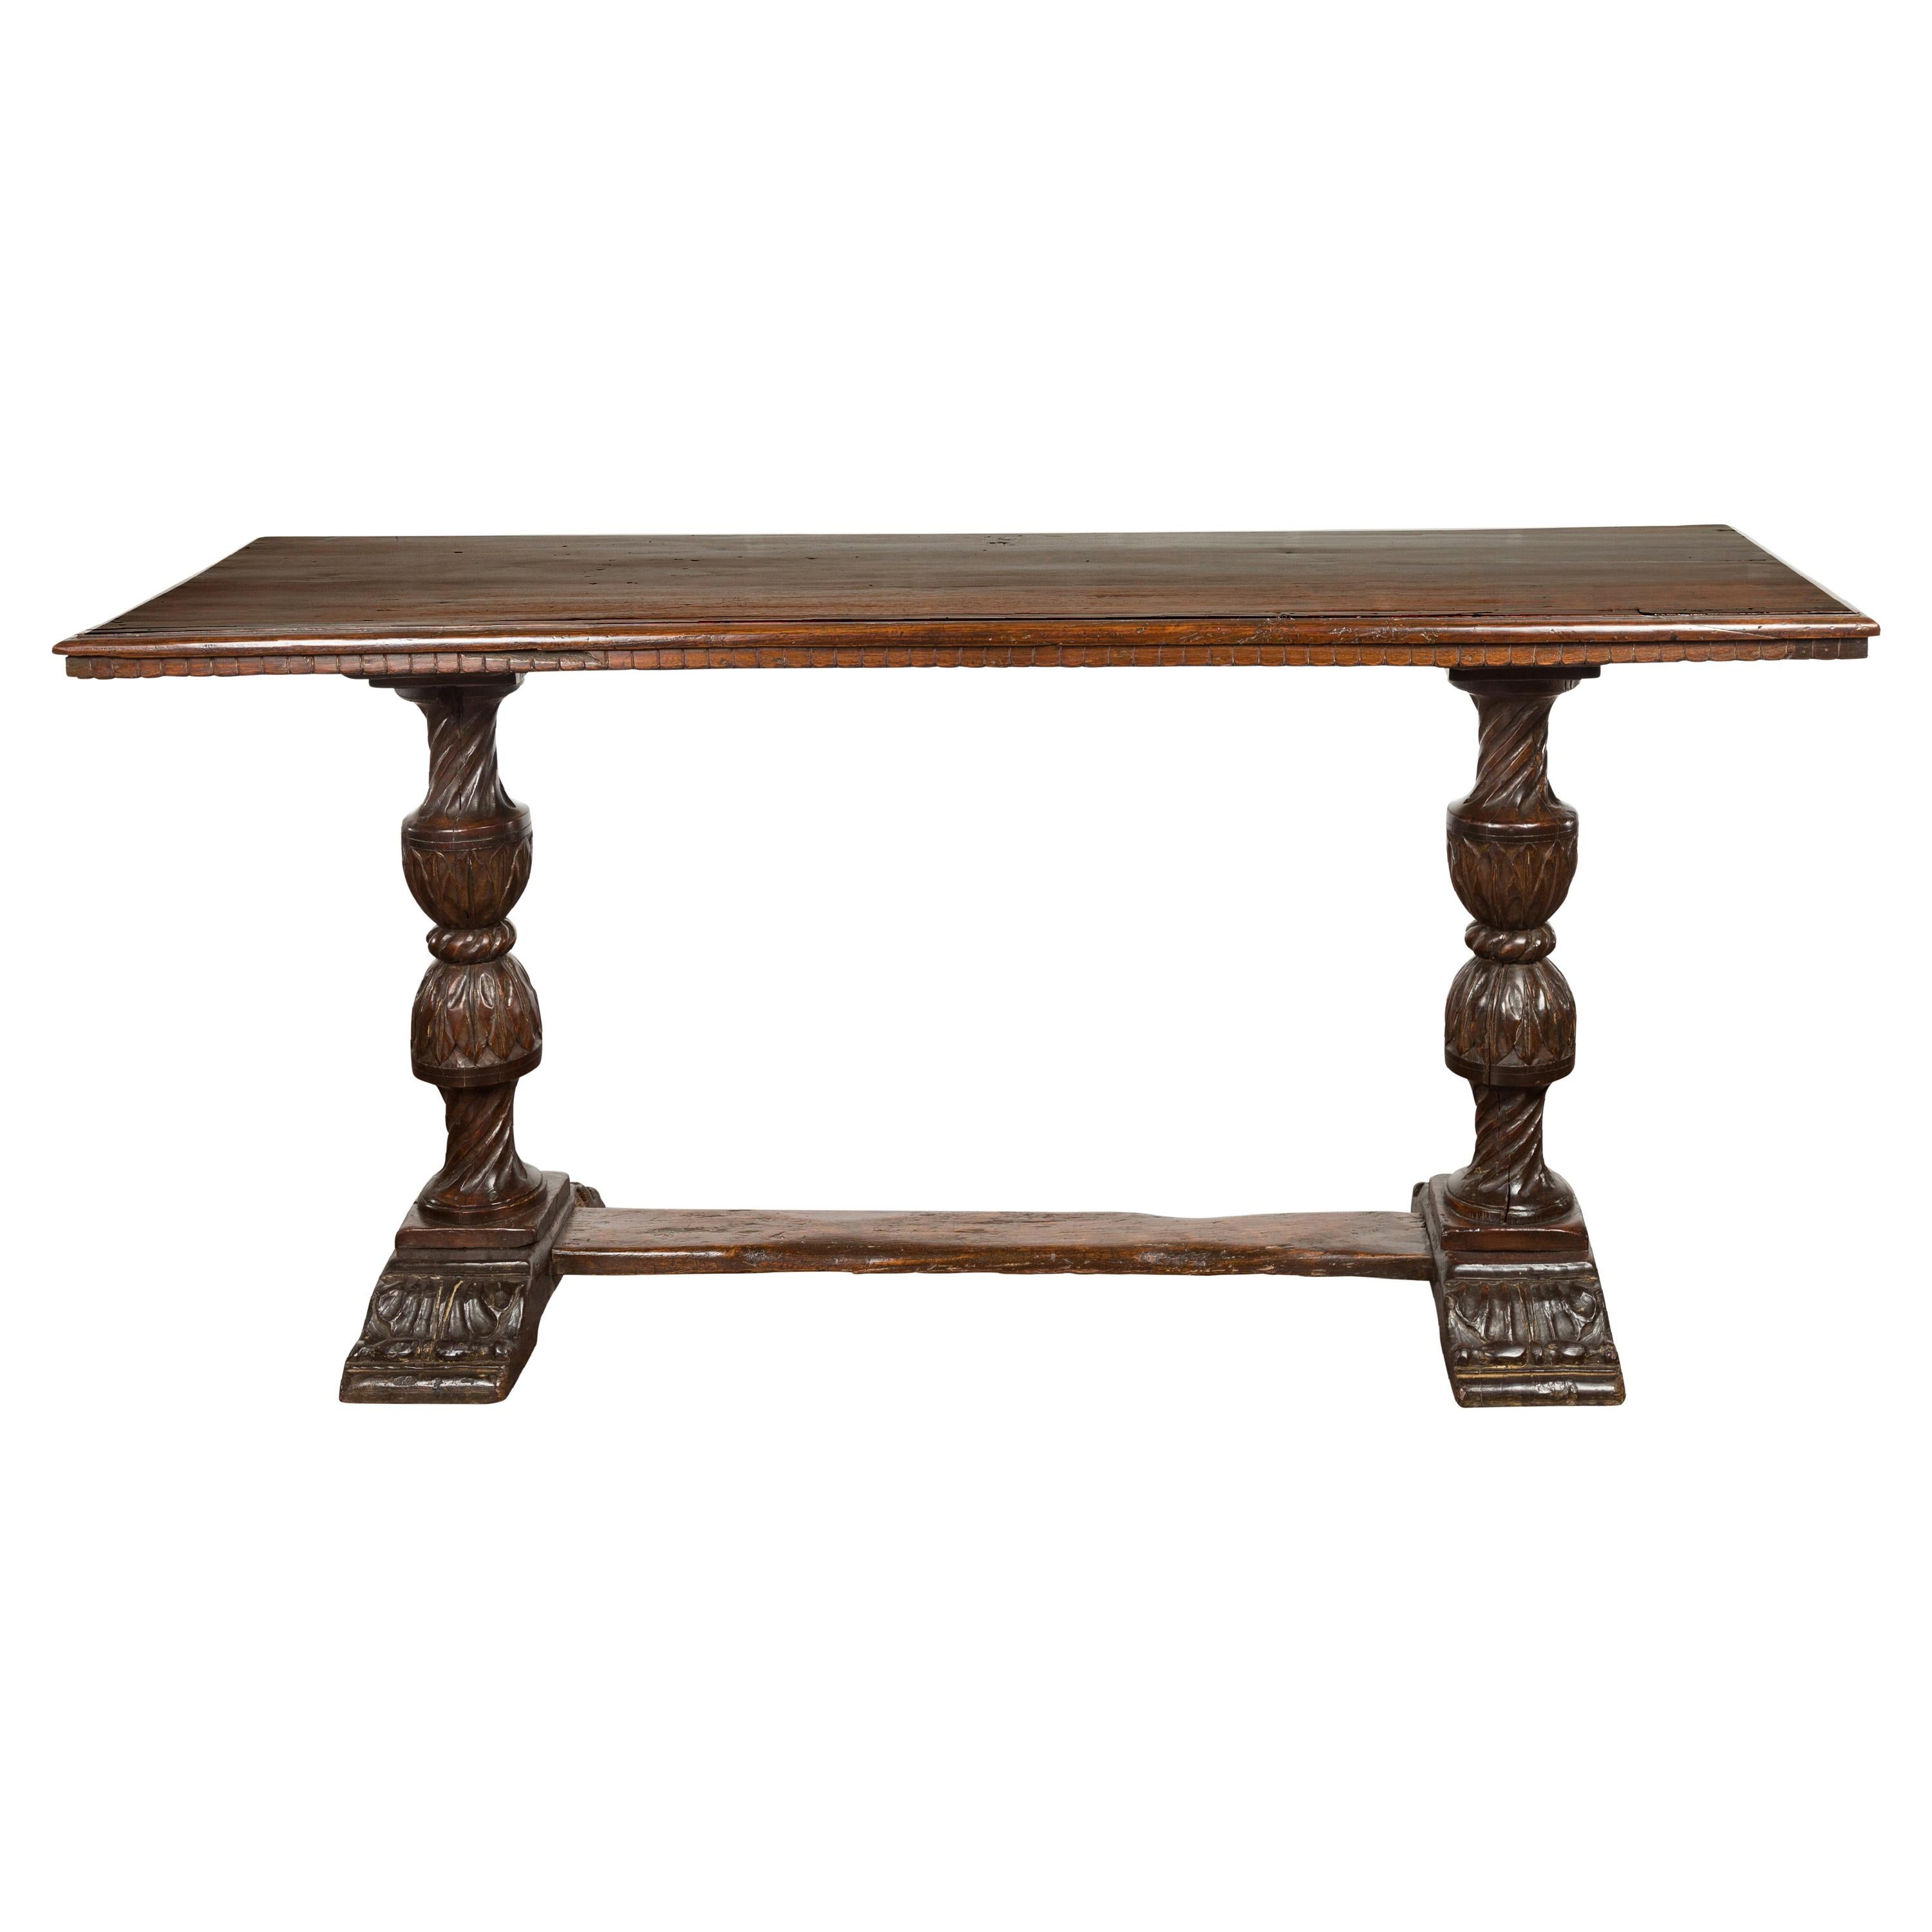 Italian 1820s Walnut Table with Carved Legs, Twisted Motifs and Waterleaves